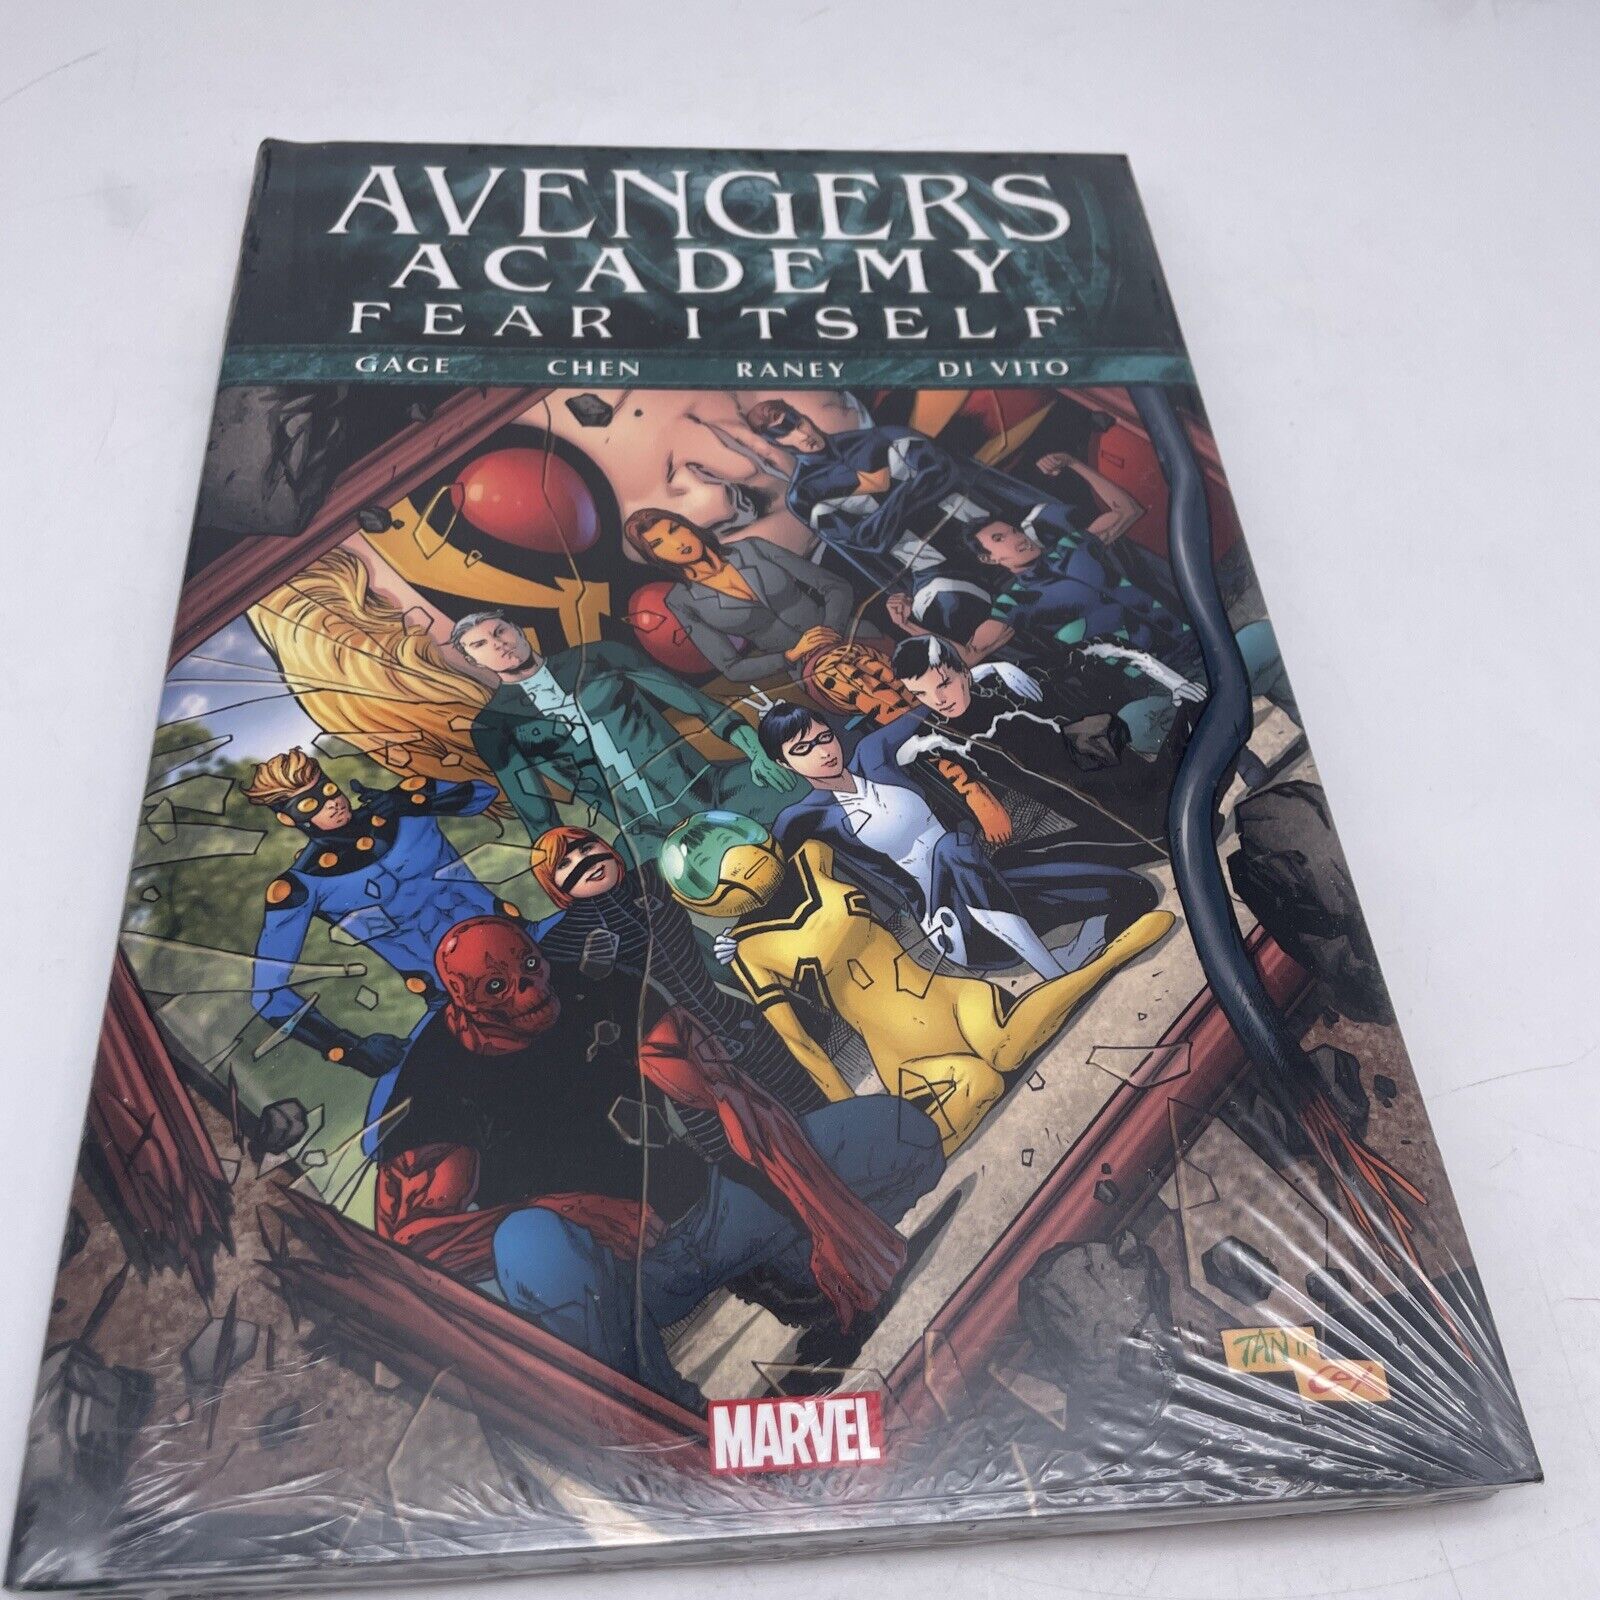 Avengers Academy Fear Itself By Christos Gage (2012) Marvel TPB HC Sealed